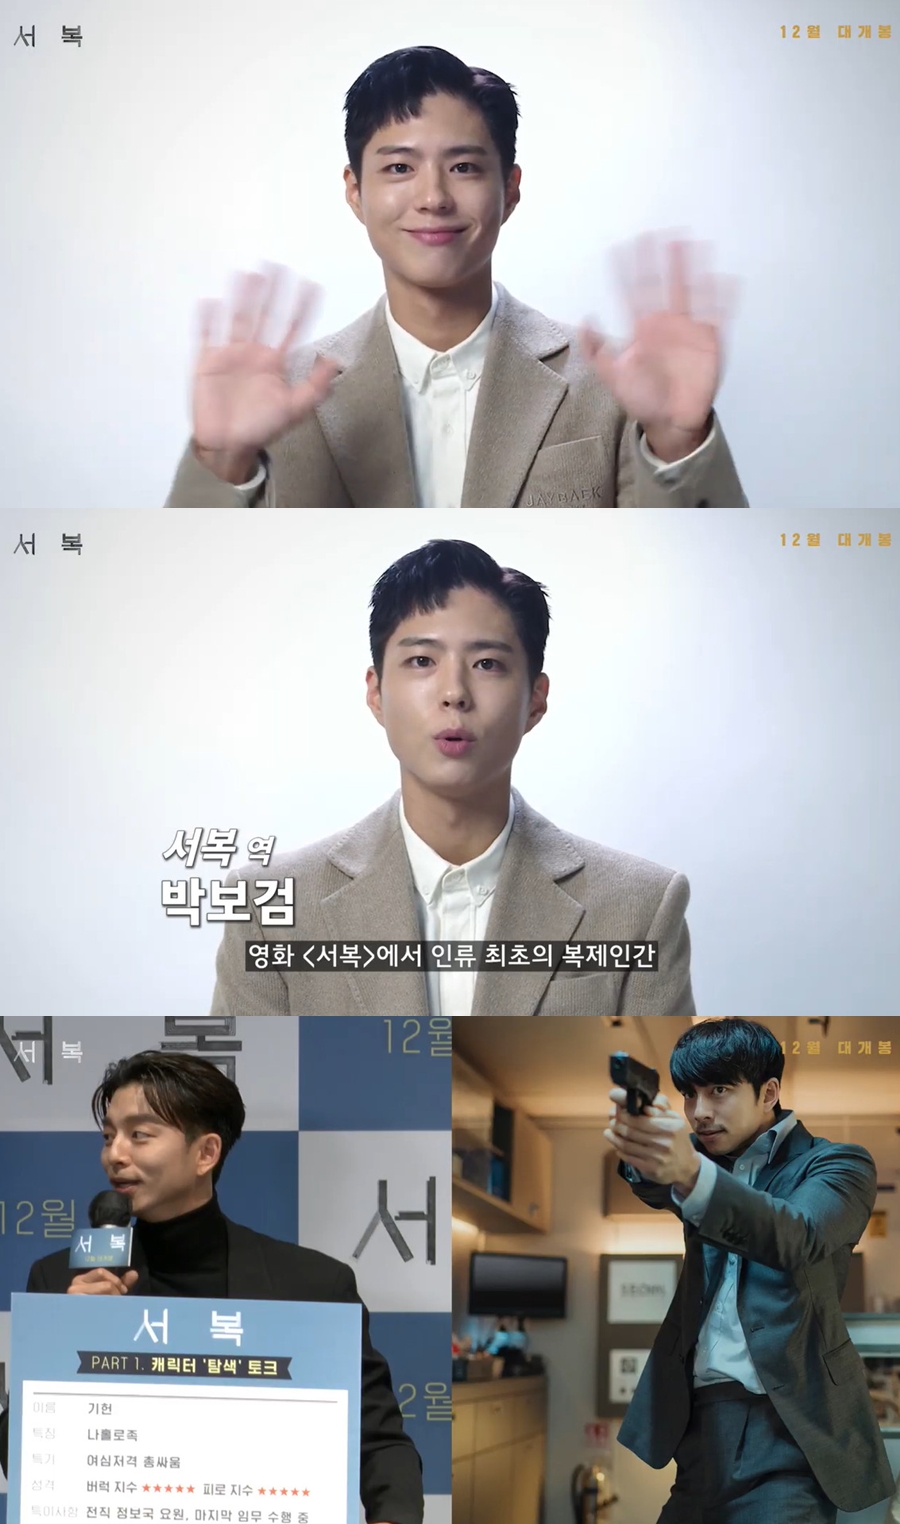 Gong Yoooo expressed his sadness toward Park Bo-gum, who failed to join the production briefing session with his enlistment.Gong Yoooo said he was so sorry for Park Bo-gums absence at the film Seo Bok (director Lee Yong-ju) Production Briefing Session, which was held online at 11 a.m. on the 27th.Jo Woo-jin was saddened by the absence of Park Bo-gum on the day, saying, We are too sorry.Park Bo-gum, who appeared in the video, said, I am so sorry that I can not be together today, and I am happy to be able to join Lee Yong-ju, who gave birth to the character Seo Bok, as well as Gong Yoooo, Jo Woo-jin, Jang Young-nam, Park Byung-eun and Kim Jae-gun.For Seo Bok, many people have taken and prepared hard to have fun and meaning. I would like to ask for your interest and warm love.Gong Yoooo laughed at Park Bo-gums inability to join him, saying, I am a little resentful. I will not see the scene now in the army, but I will be suffering.I am so excited about the video Boni, and we will harvest it well because Park Bo-gum has built well. Seo Bok tells the story of the intelligence agent, Gong Yooo, who was assigned to the last task of transferring the first cloned human being Seo Bok to the secret, being caught up in an unexpected situation with a special companion in the pursuit of several forces aiming for Seo Bok.Released Dec.=